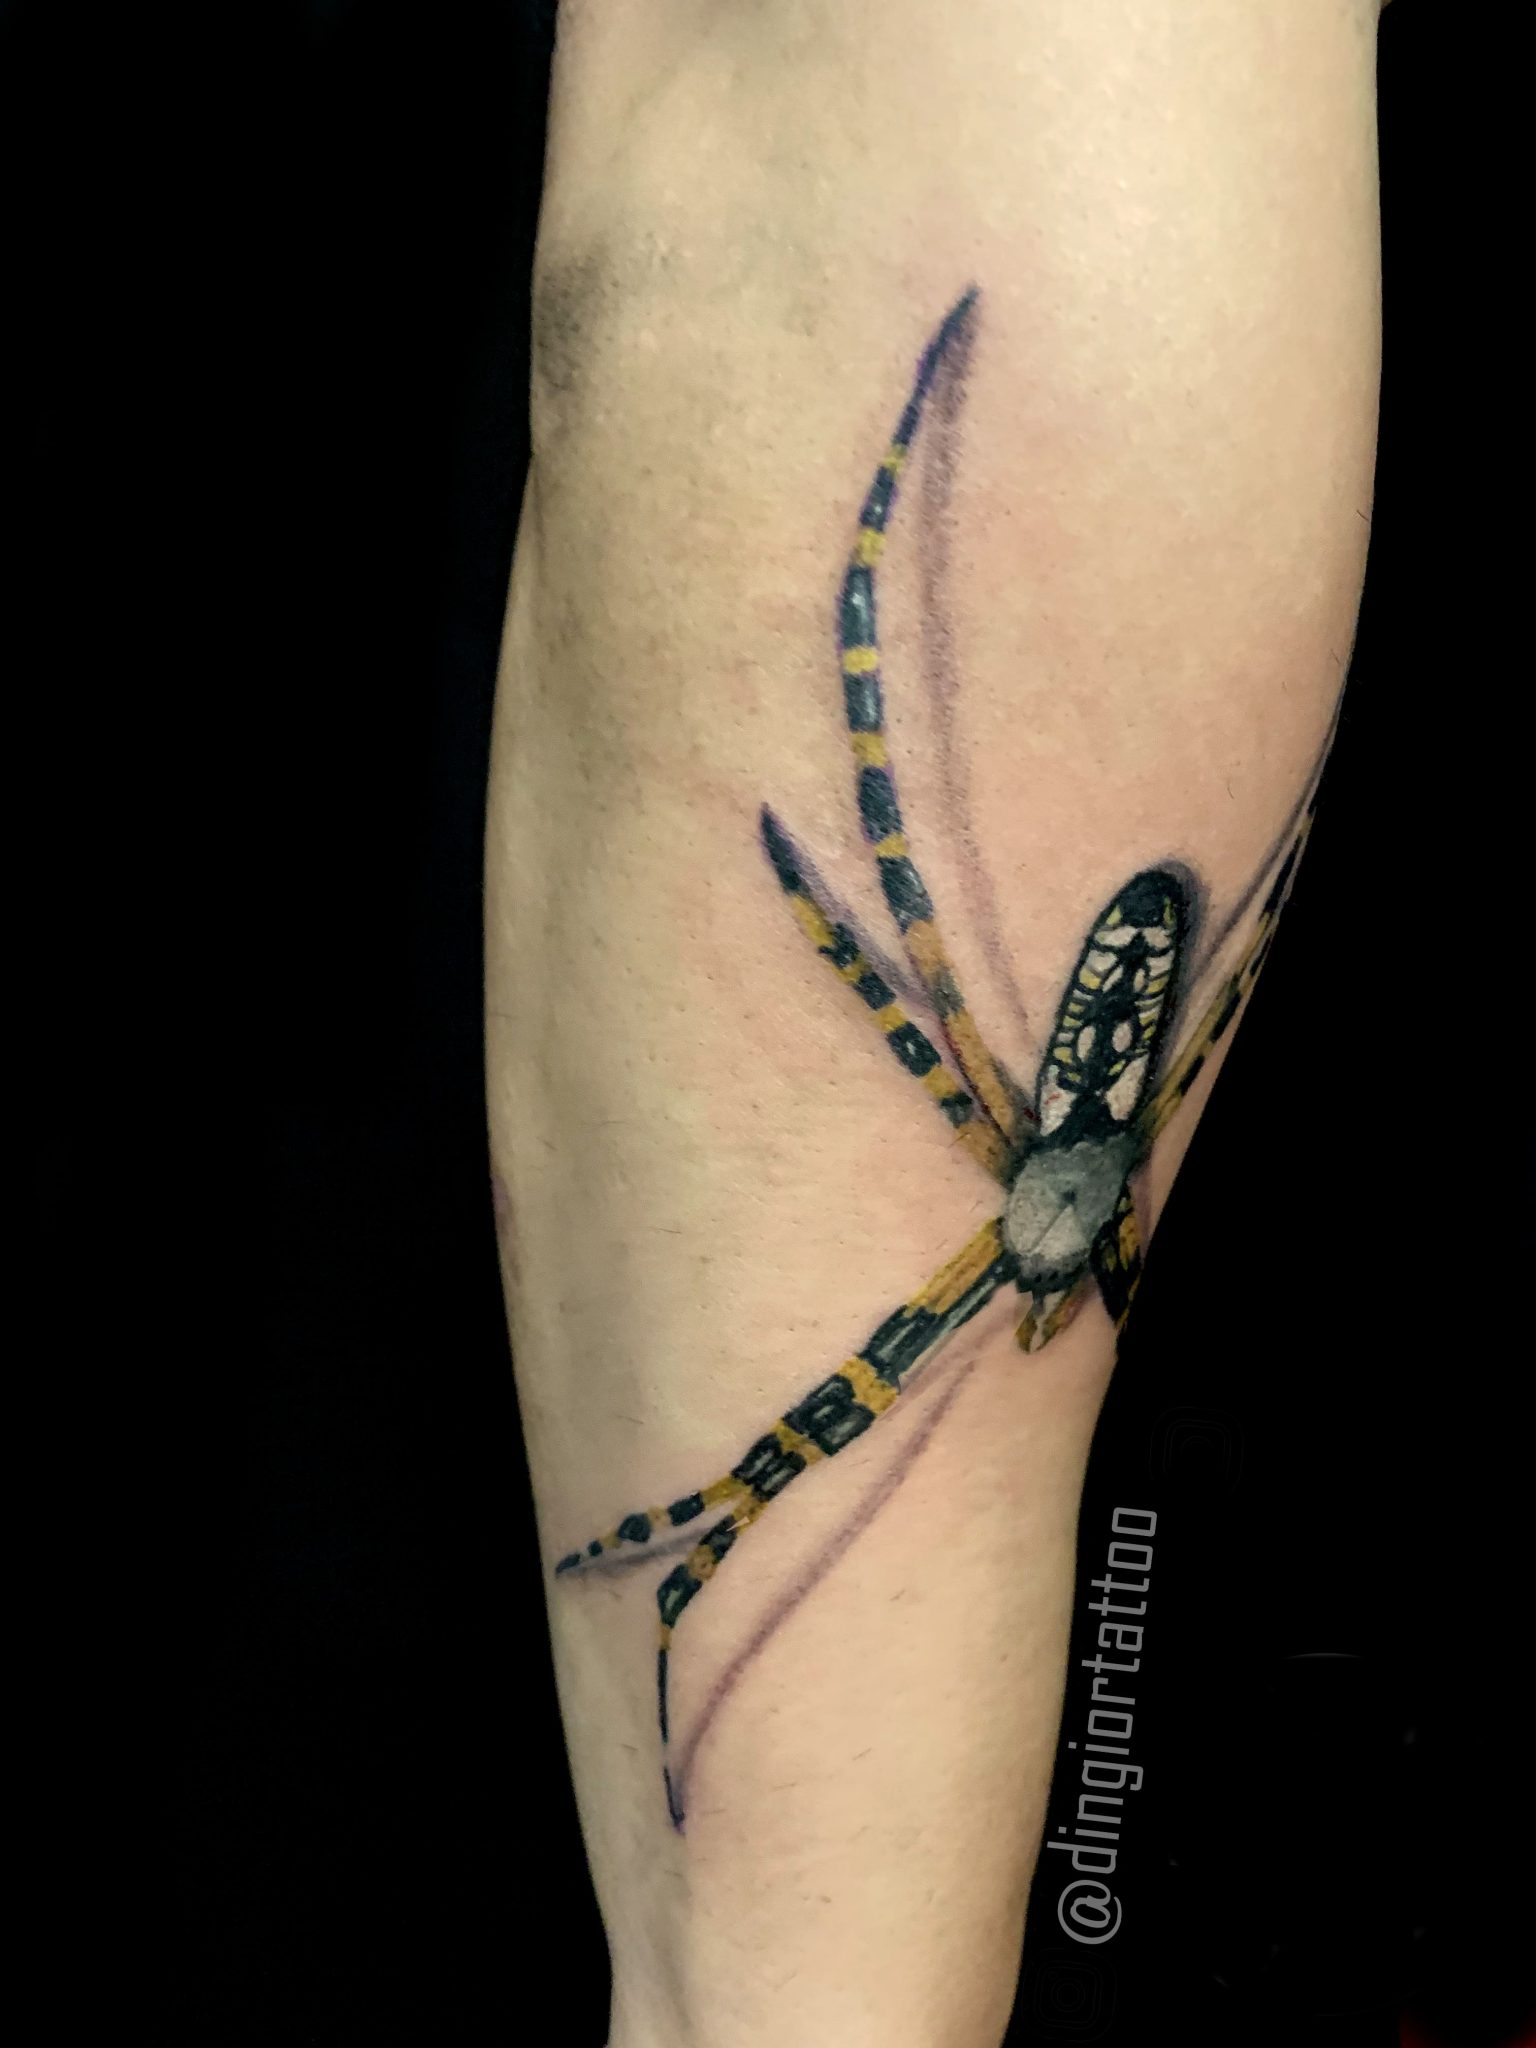 Realism or Realistic Tattoos Spider